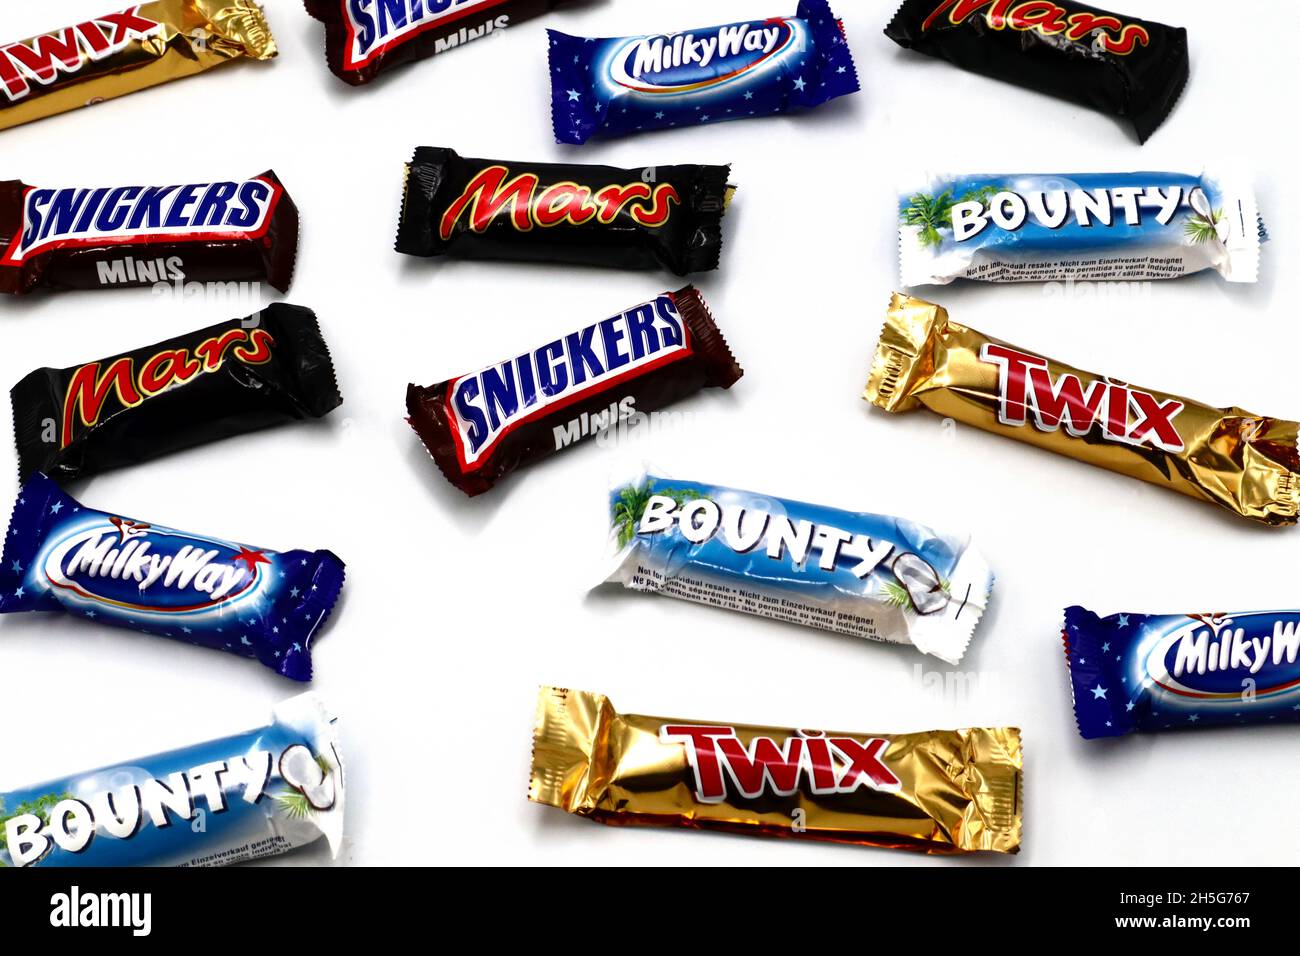 Alamy of Twix Way bars, Mars, Bounty, - and Stock Incorporated Snickers, brands Mars Milky chocolate Photo